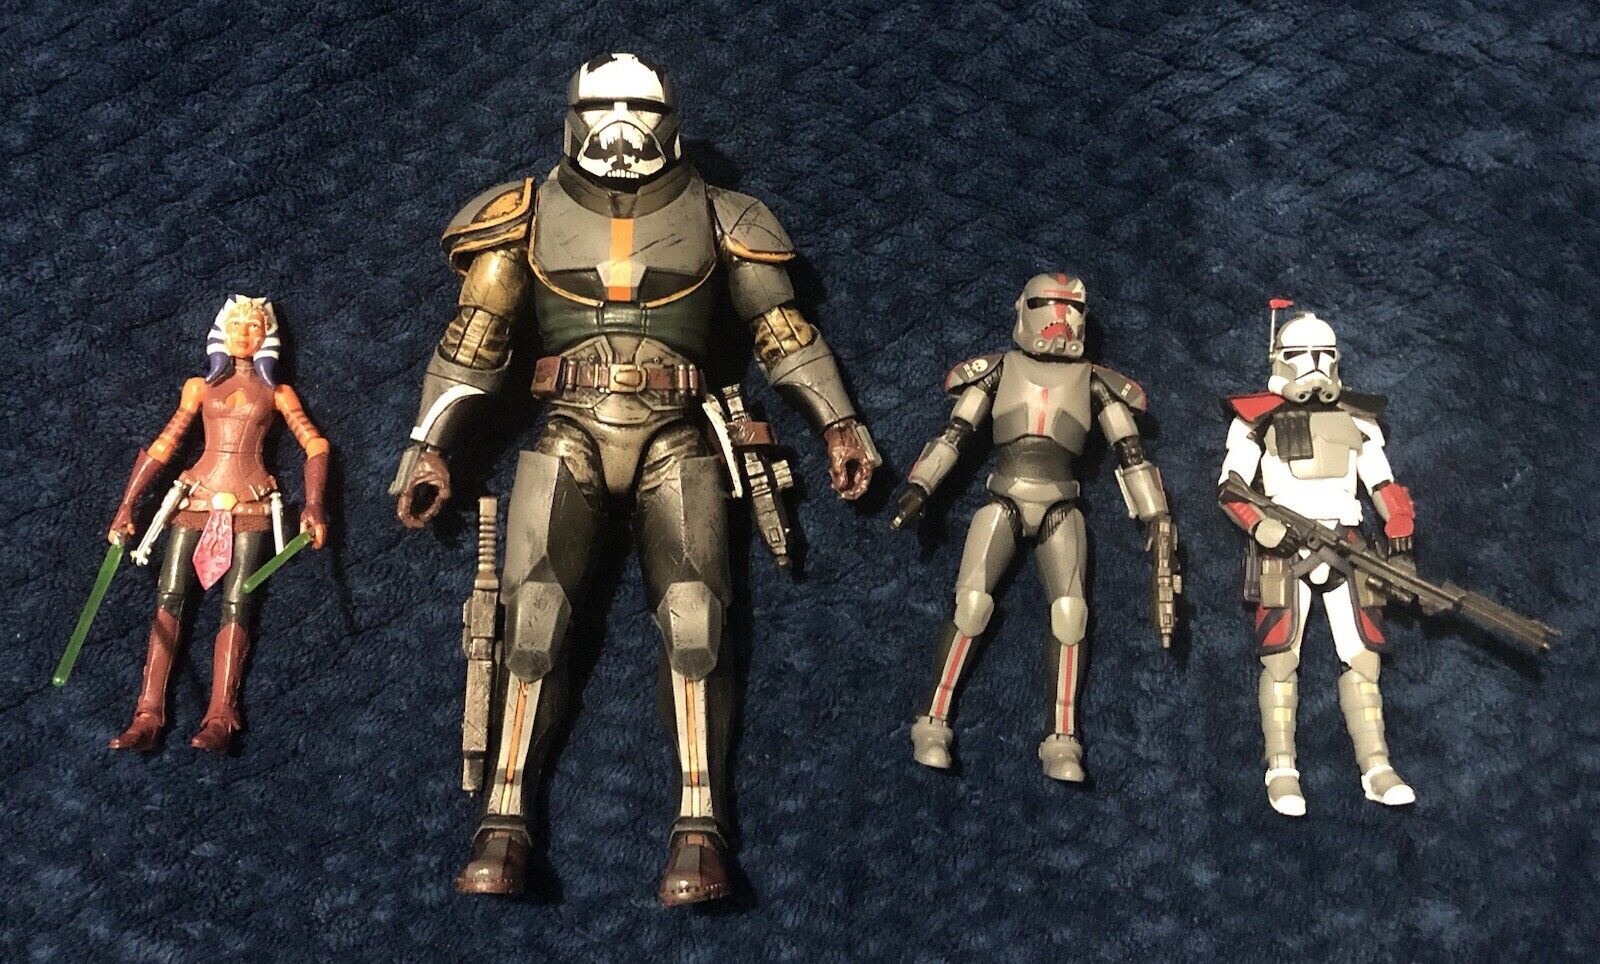 Star Wars Hasbro Action Figure Lot Of 4 Figures Black Series Vintage Collection